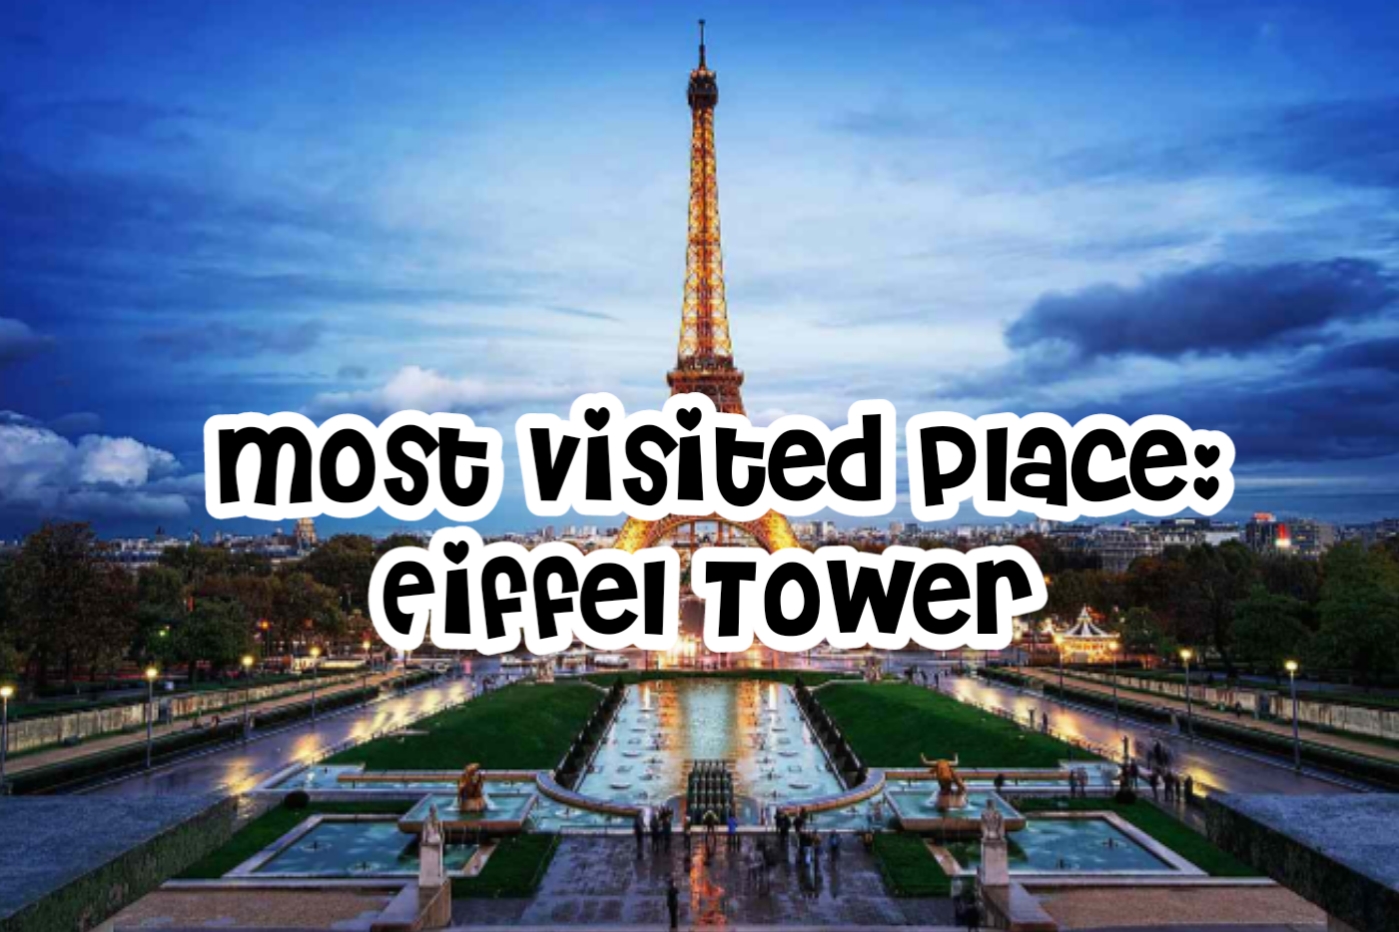 What is the #1 most visited place in the world?